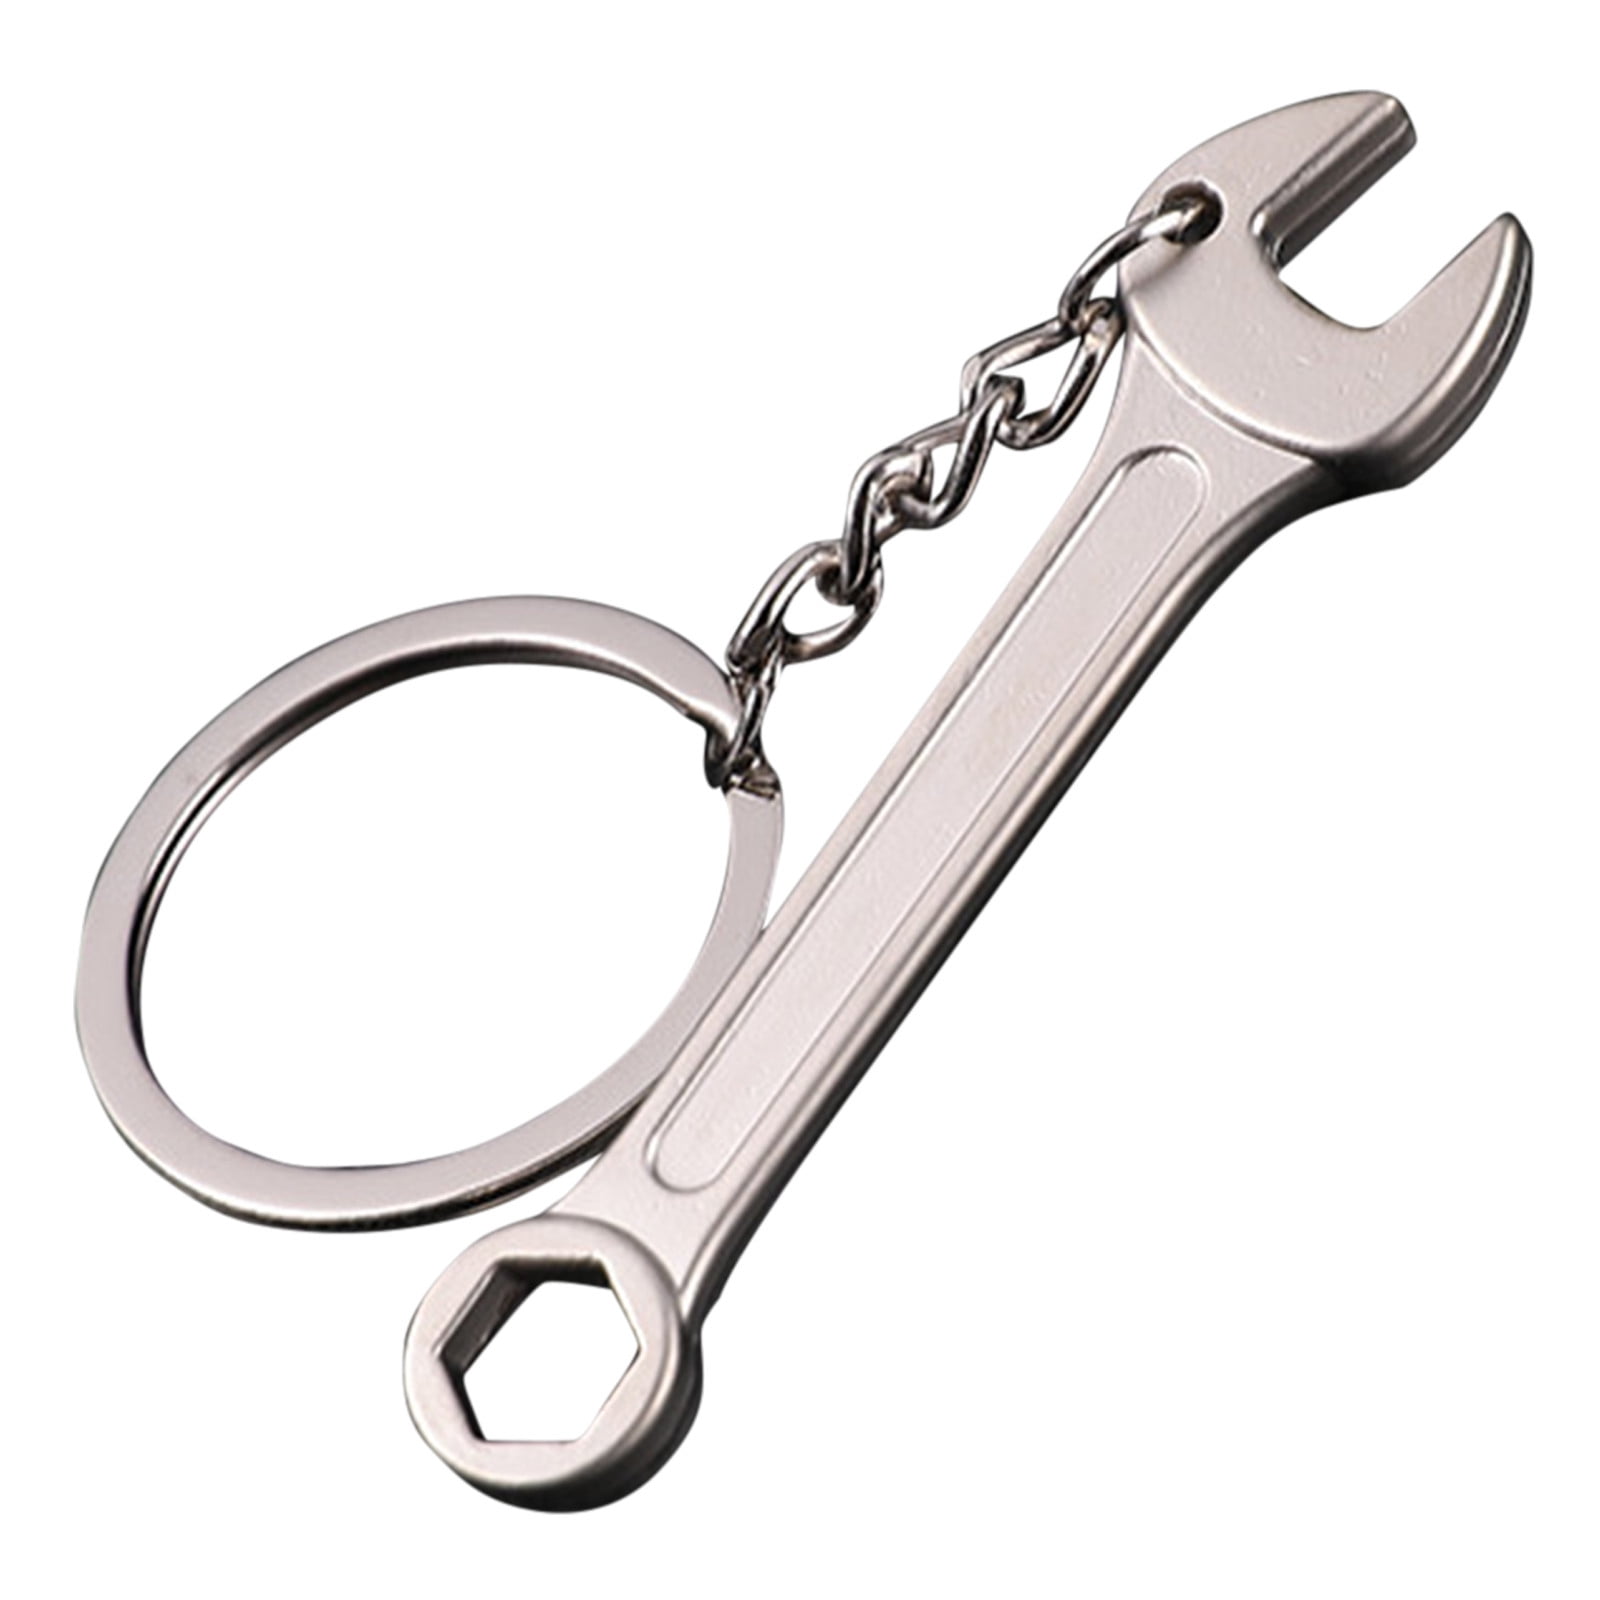 Stainless steel Adjustable Creative  Wrench Spanner Key Chain Ring Keyring Tool 